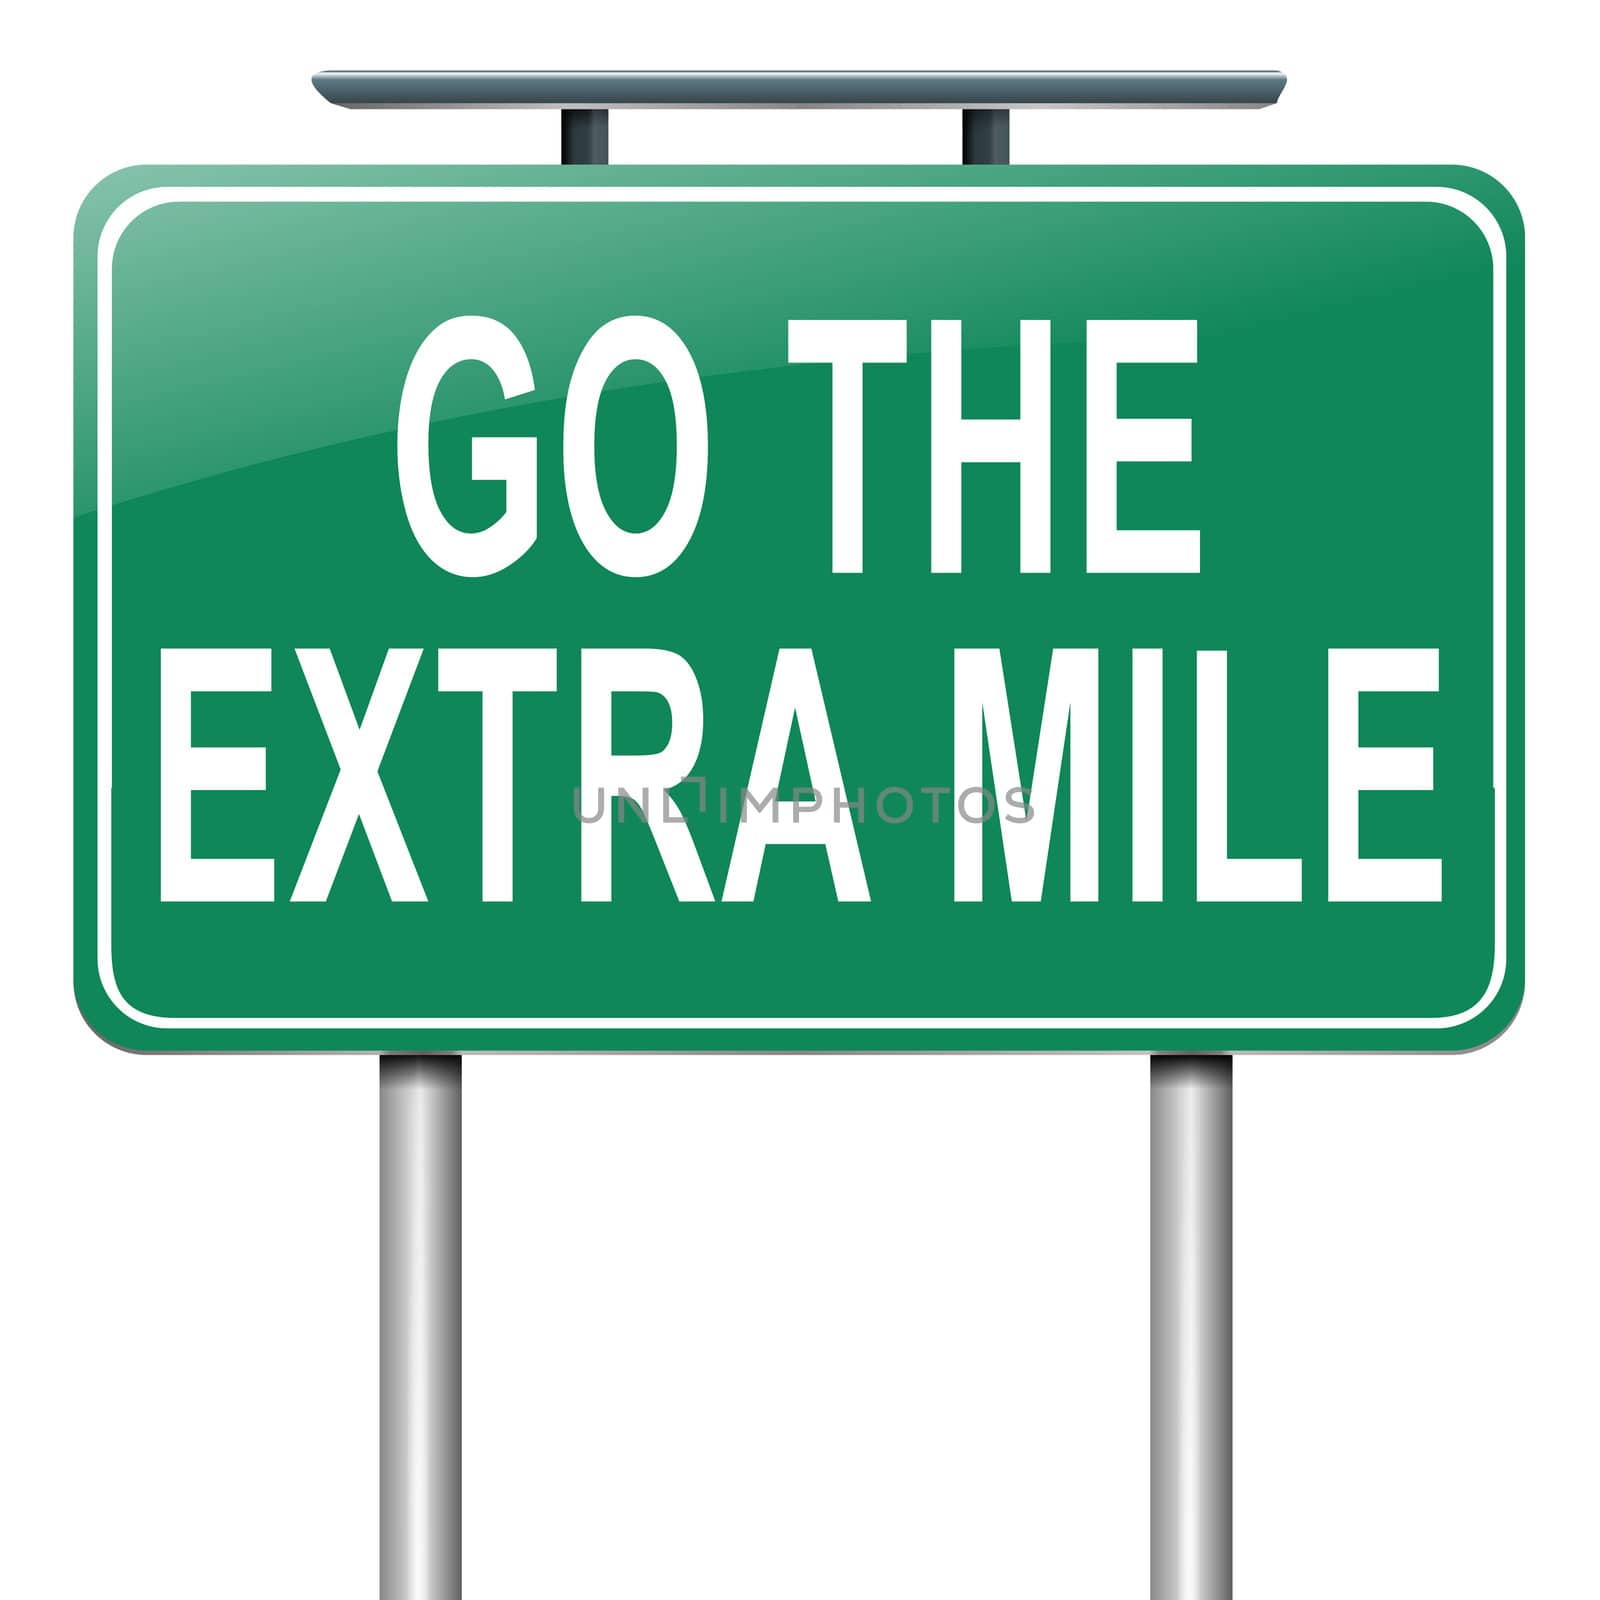 Go the extra mile. by 72soul